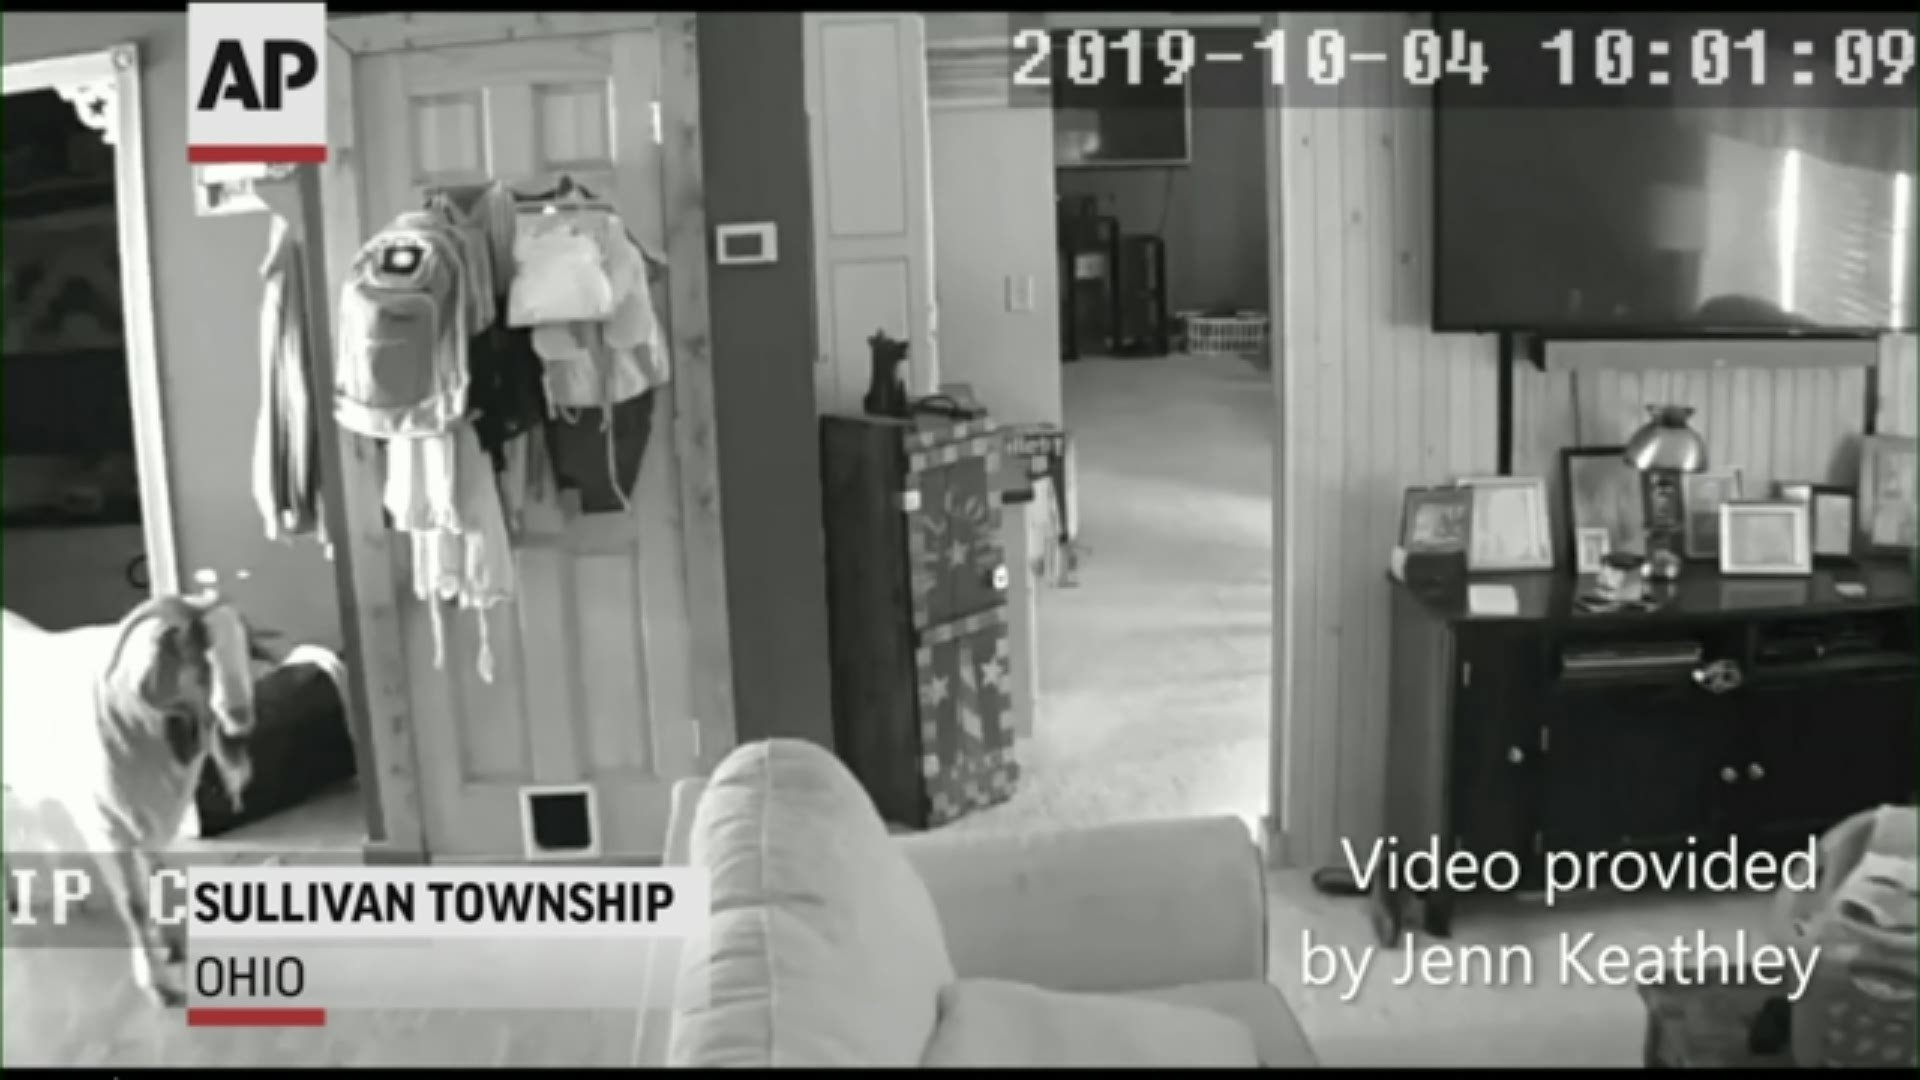 An Ohio homeowner is busy cleaning up after a large goat broke into her home by ramming through a sliding glass door. (Jennifer Keathley via AP)